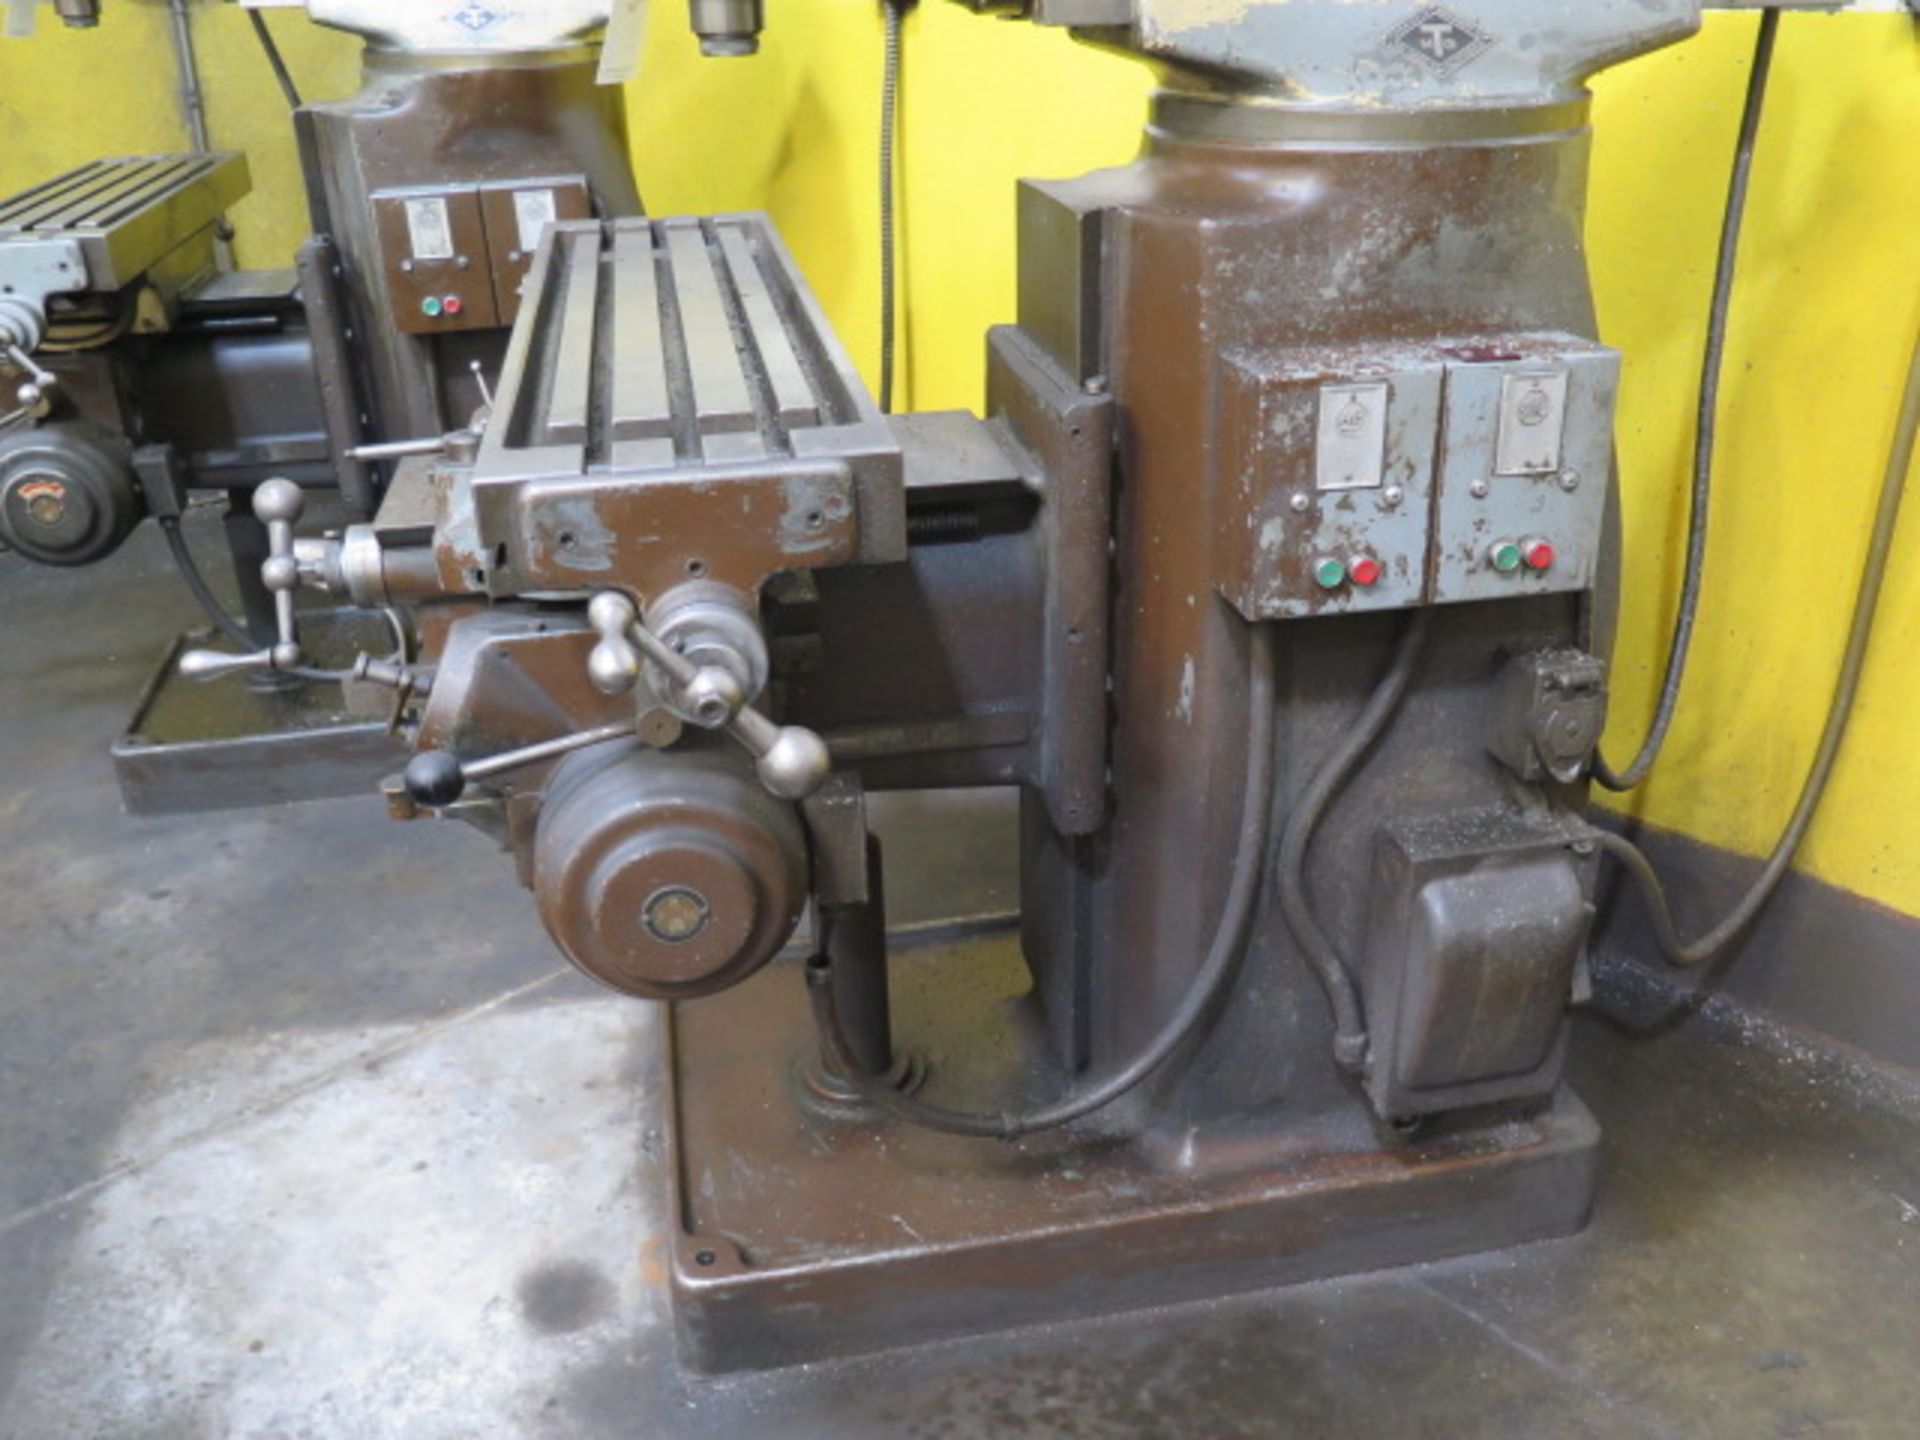 Tree 2UVR Vertical Mill s/n 7989 w/ 60-3300 RPM, Colleted Spindle, PF, 10 ½” x 42” Table, SOLD AS IS - Image 7 of 9